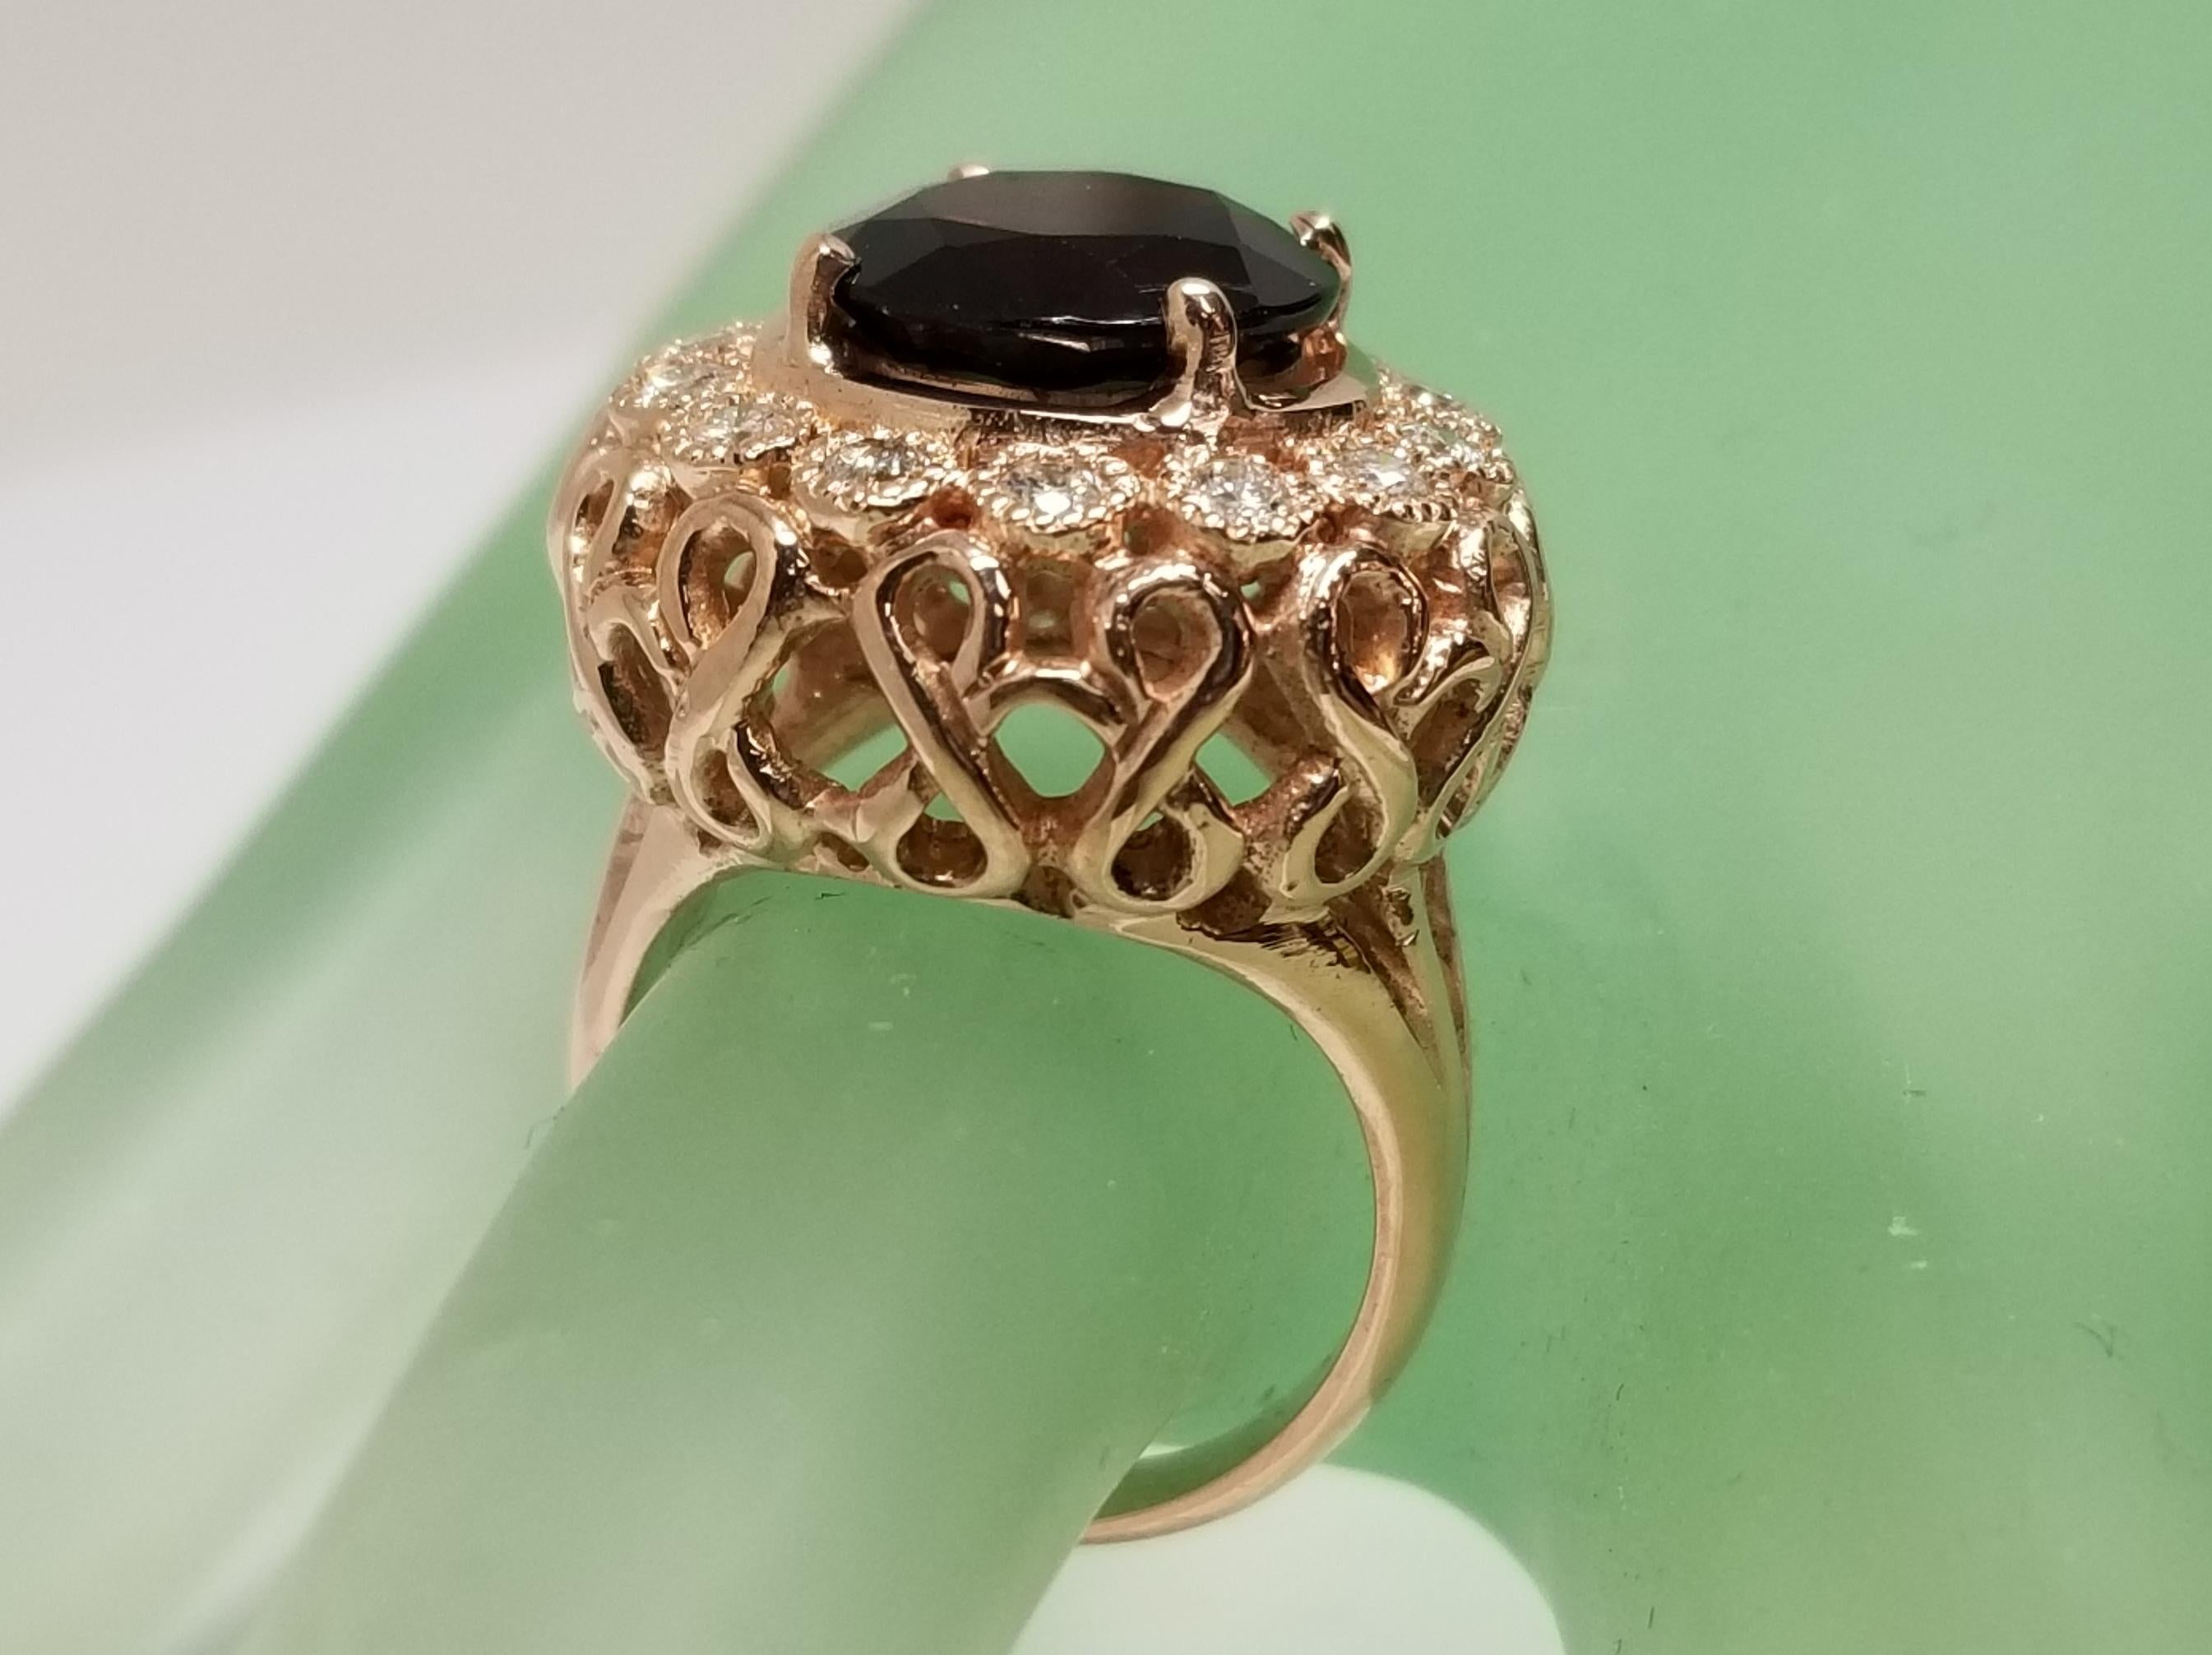 14k rose gold garnet and diamond domed ring, containing 1 round garnet of gem quality weighing 5.45cts. and 14 round full cut diamonds weighing .60pts.  This ring is a size 6 but we will size to fit for free.